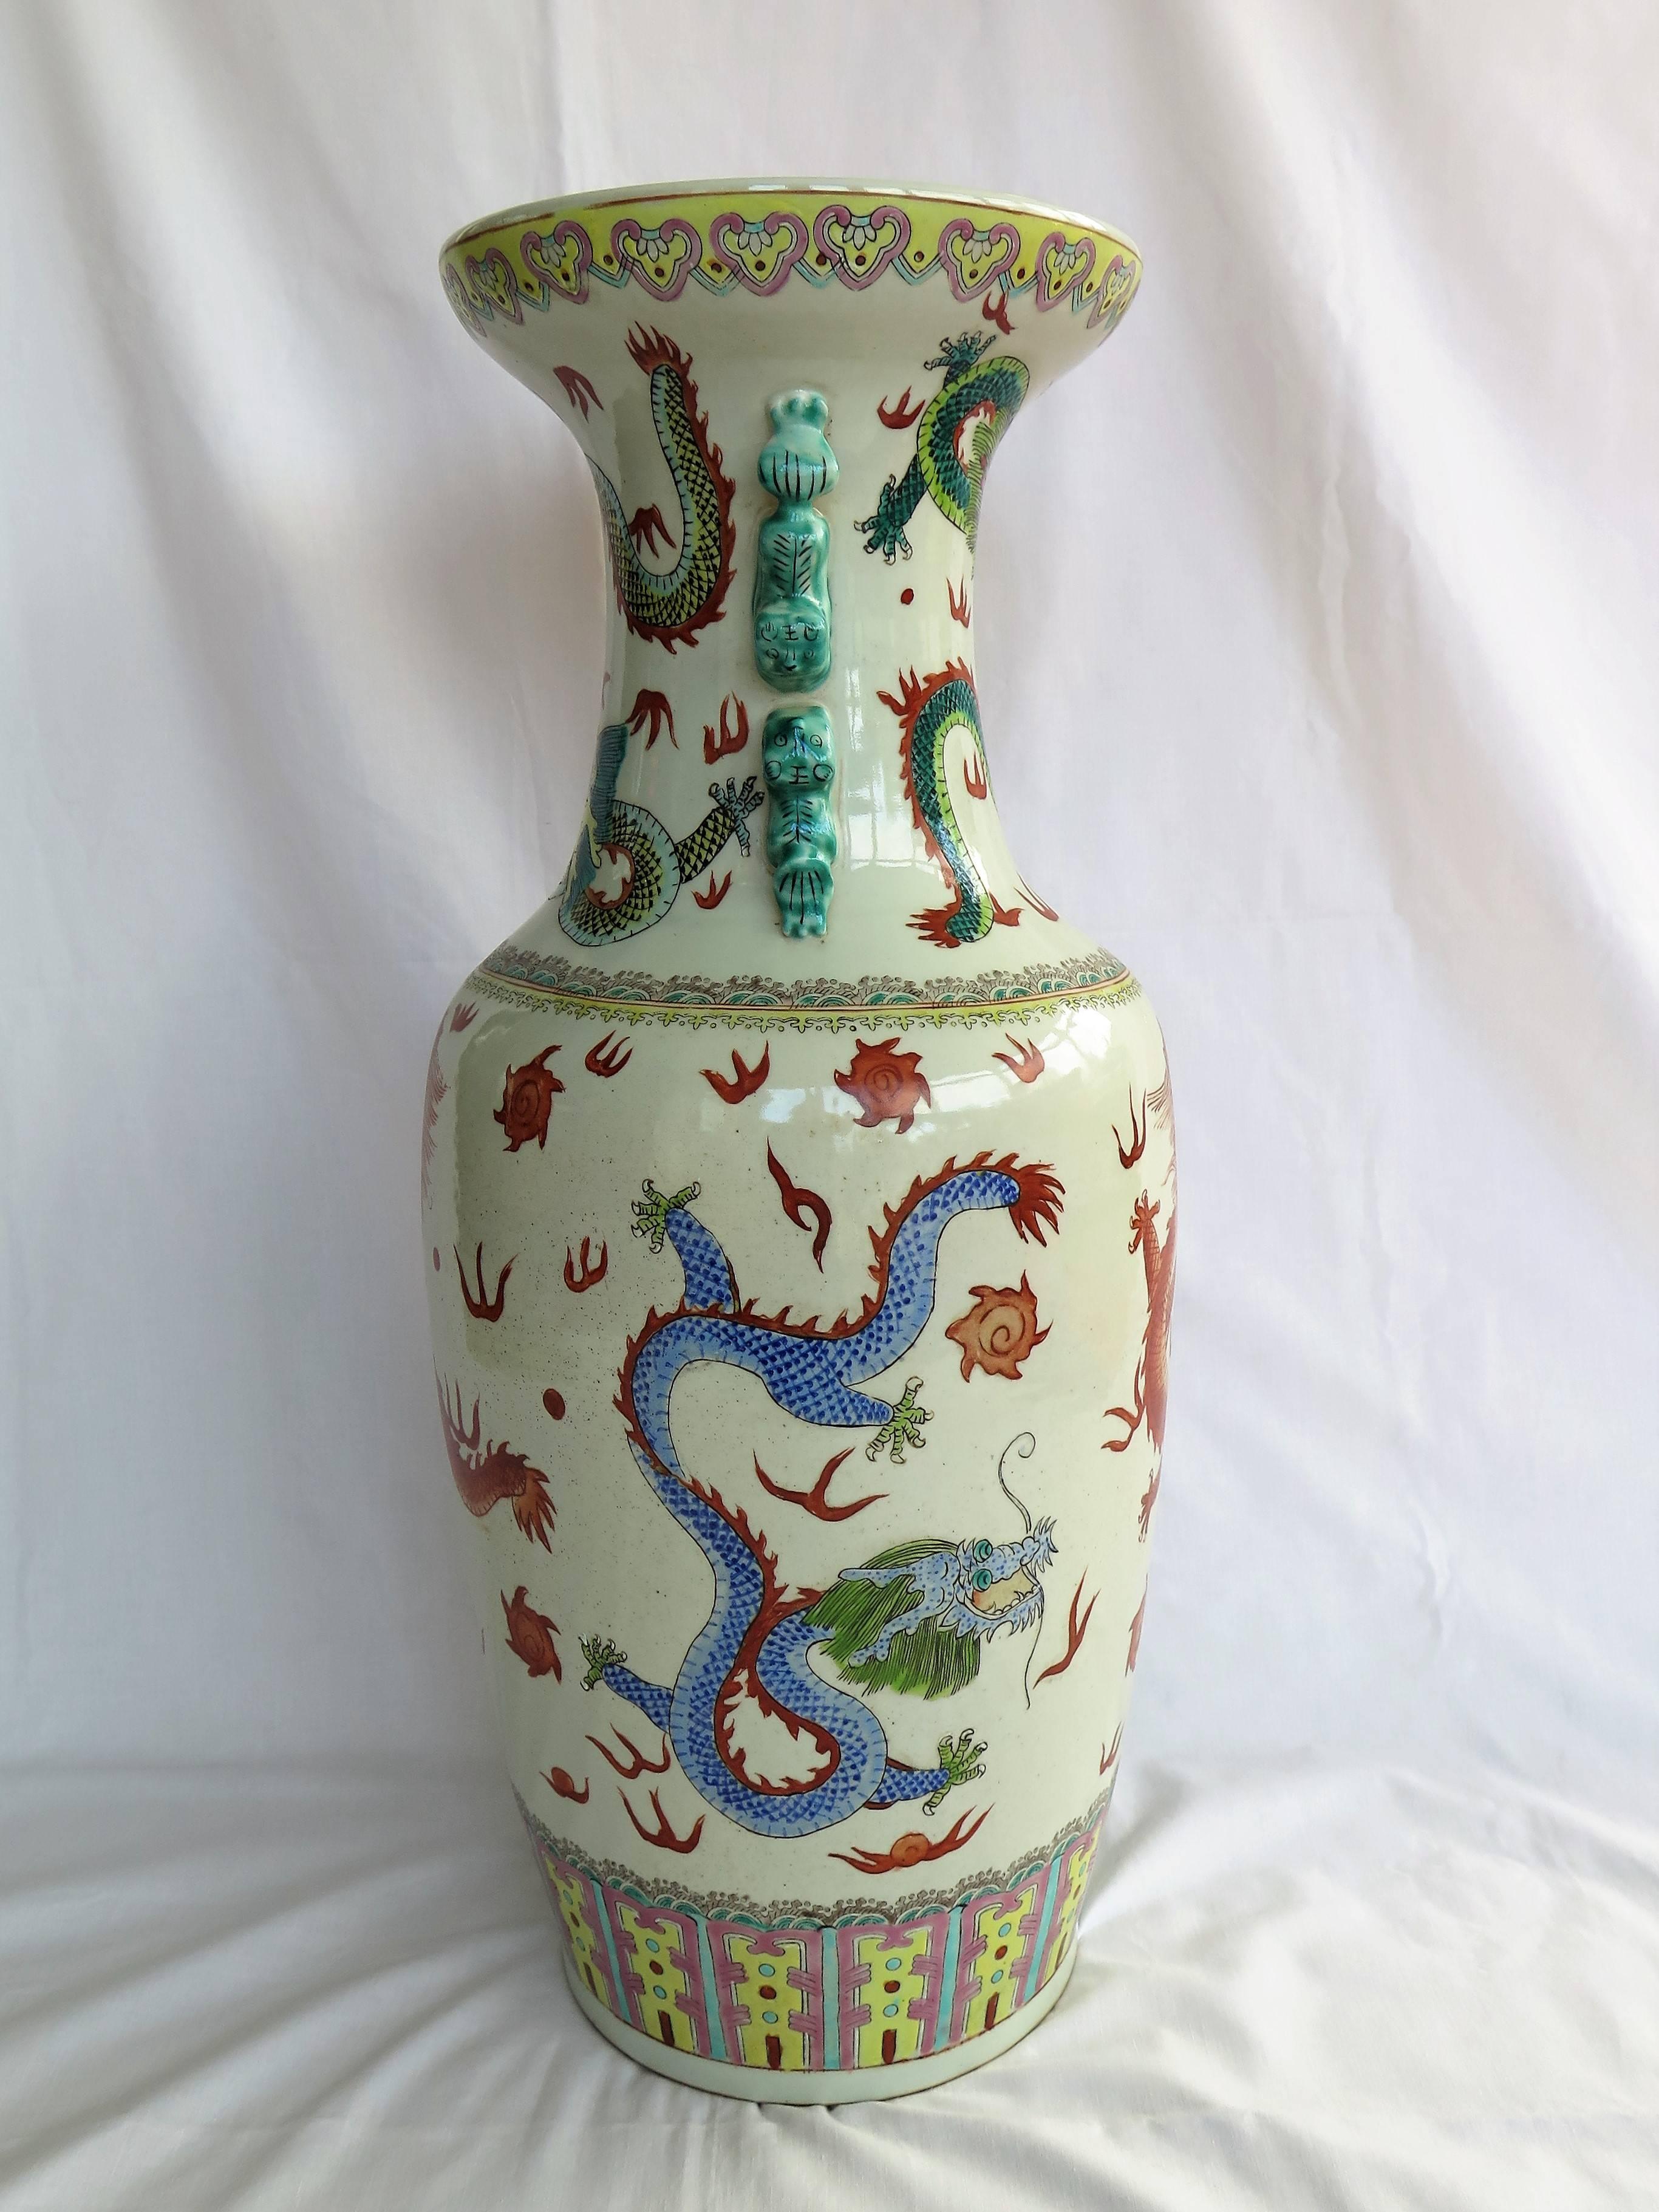 This is a very decorative, large, hand painted, Chinese porcelain Floor Vase dating to the early 20th century, circa 1920.

The vase has a baluster shape with a flared open neck rim, with four climbing foo dogs at the neck, two either side. 

The